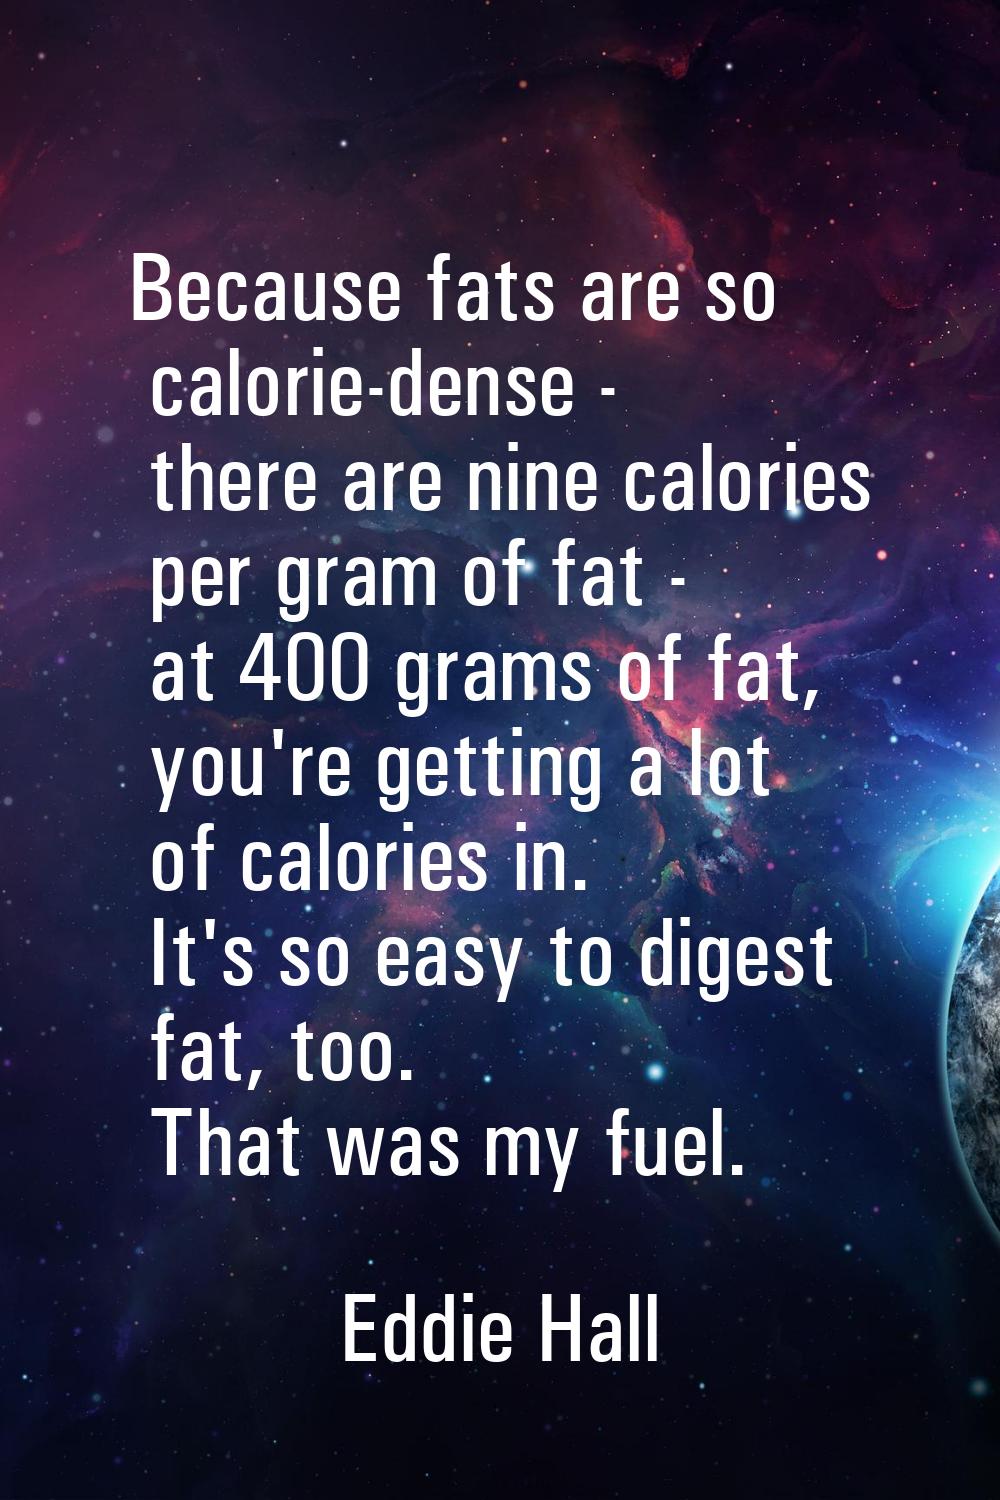 Because fats are so calorie-dense - there are nine calories per gram of fat - at 400 grams of fat, 